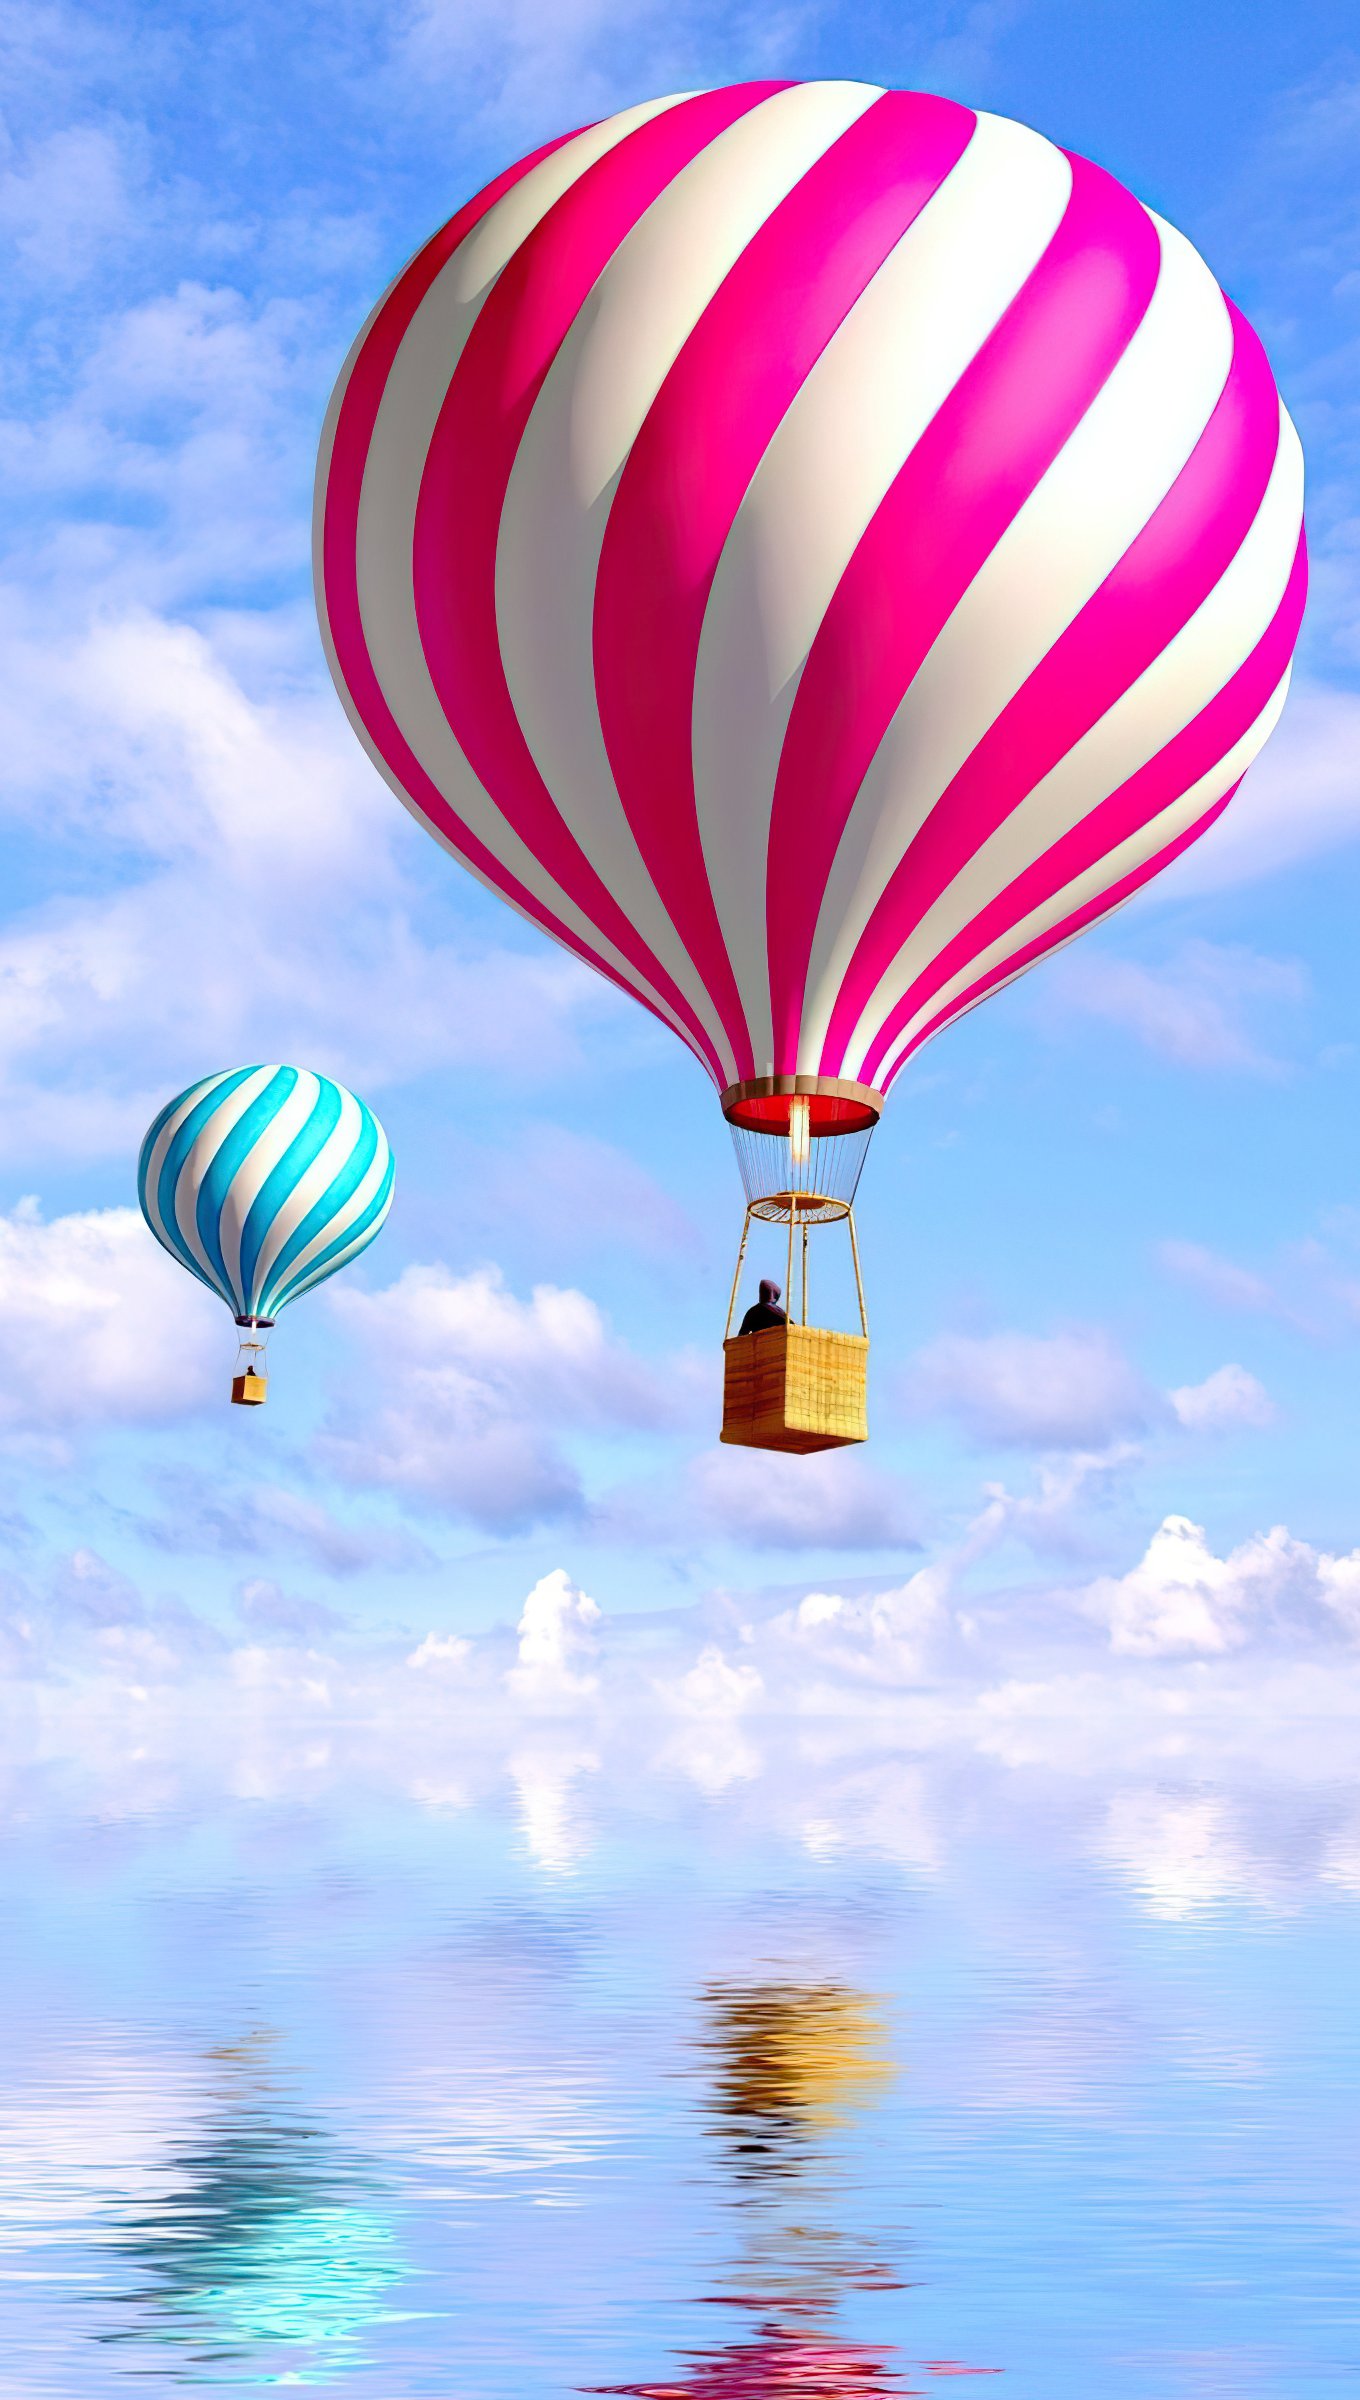 Hot air balloon in the clouds Wallpaper 4k Ultra HD ID:7241